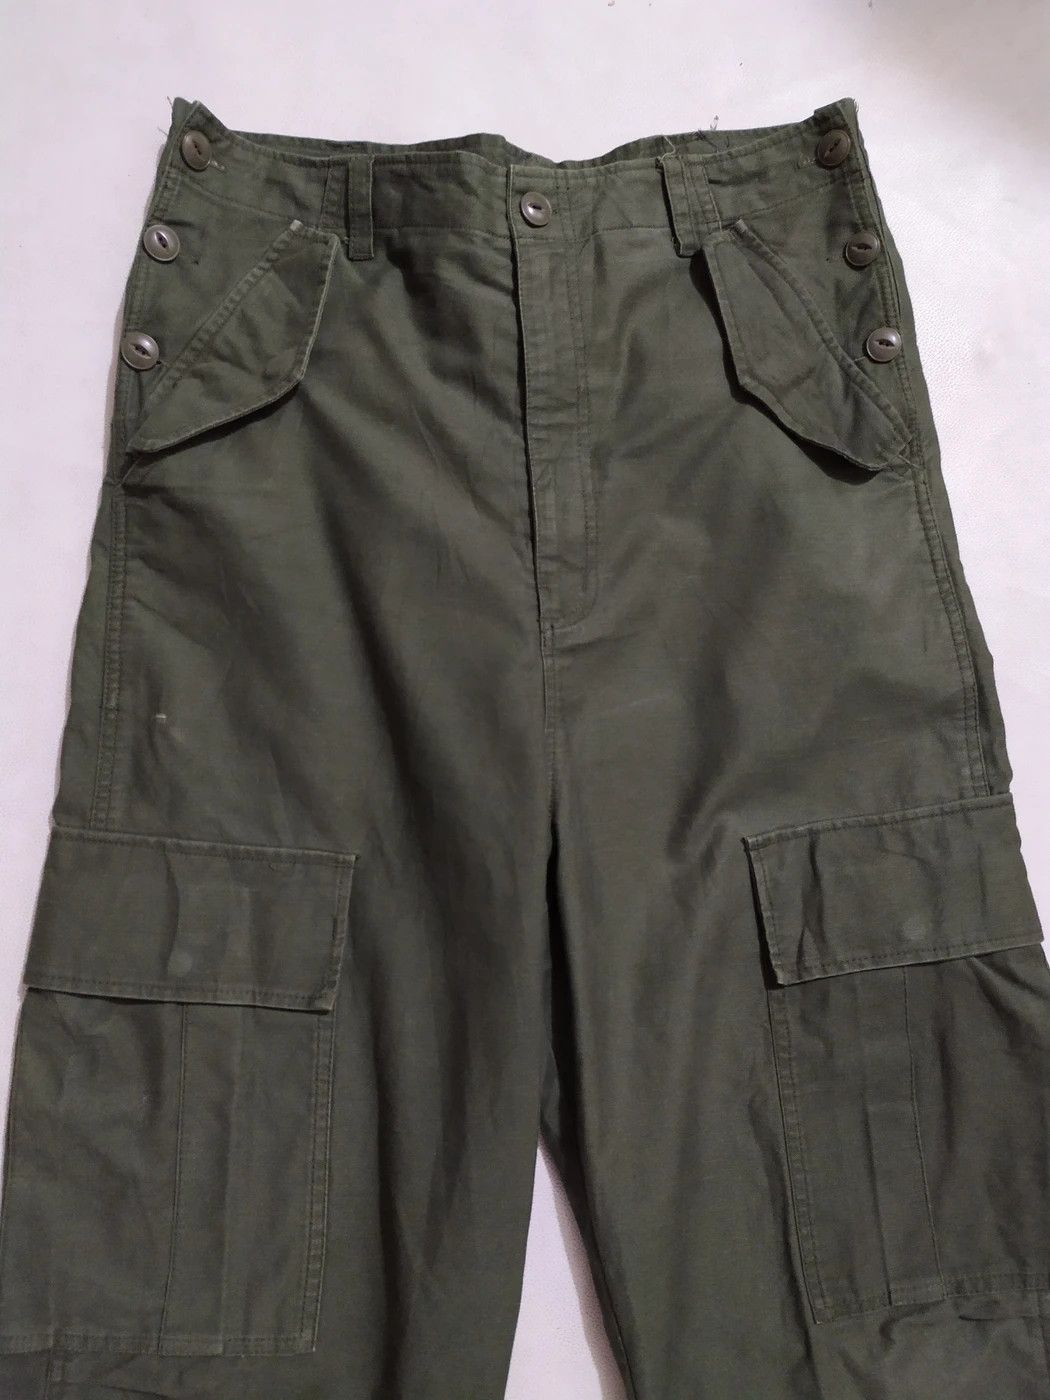 Japanese Brand Cargo Pants Size US 31 - 2 Preview